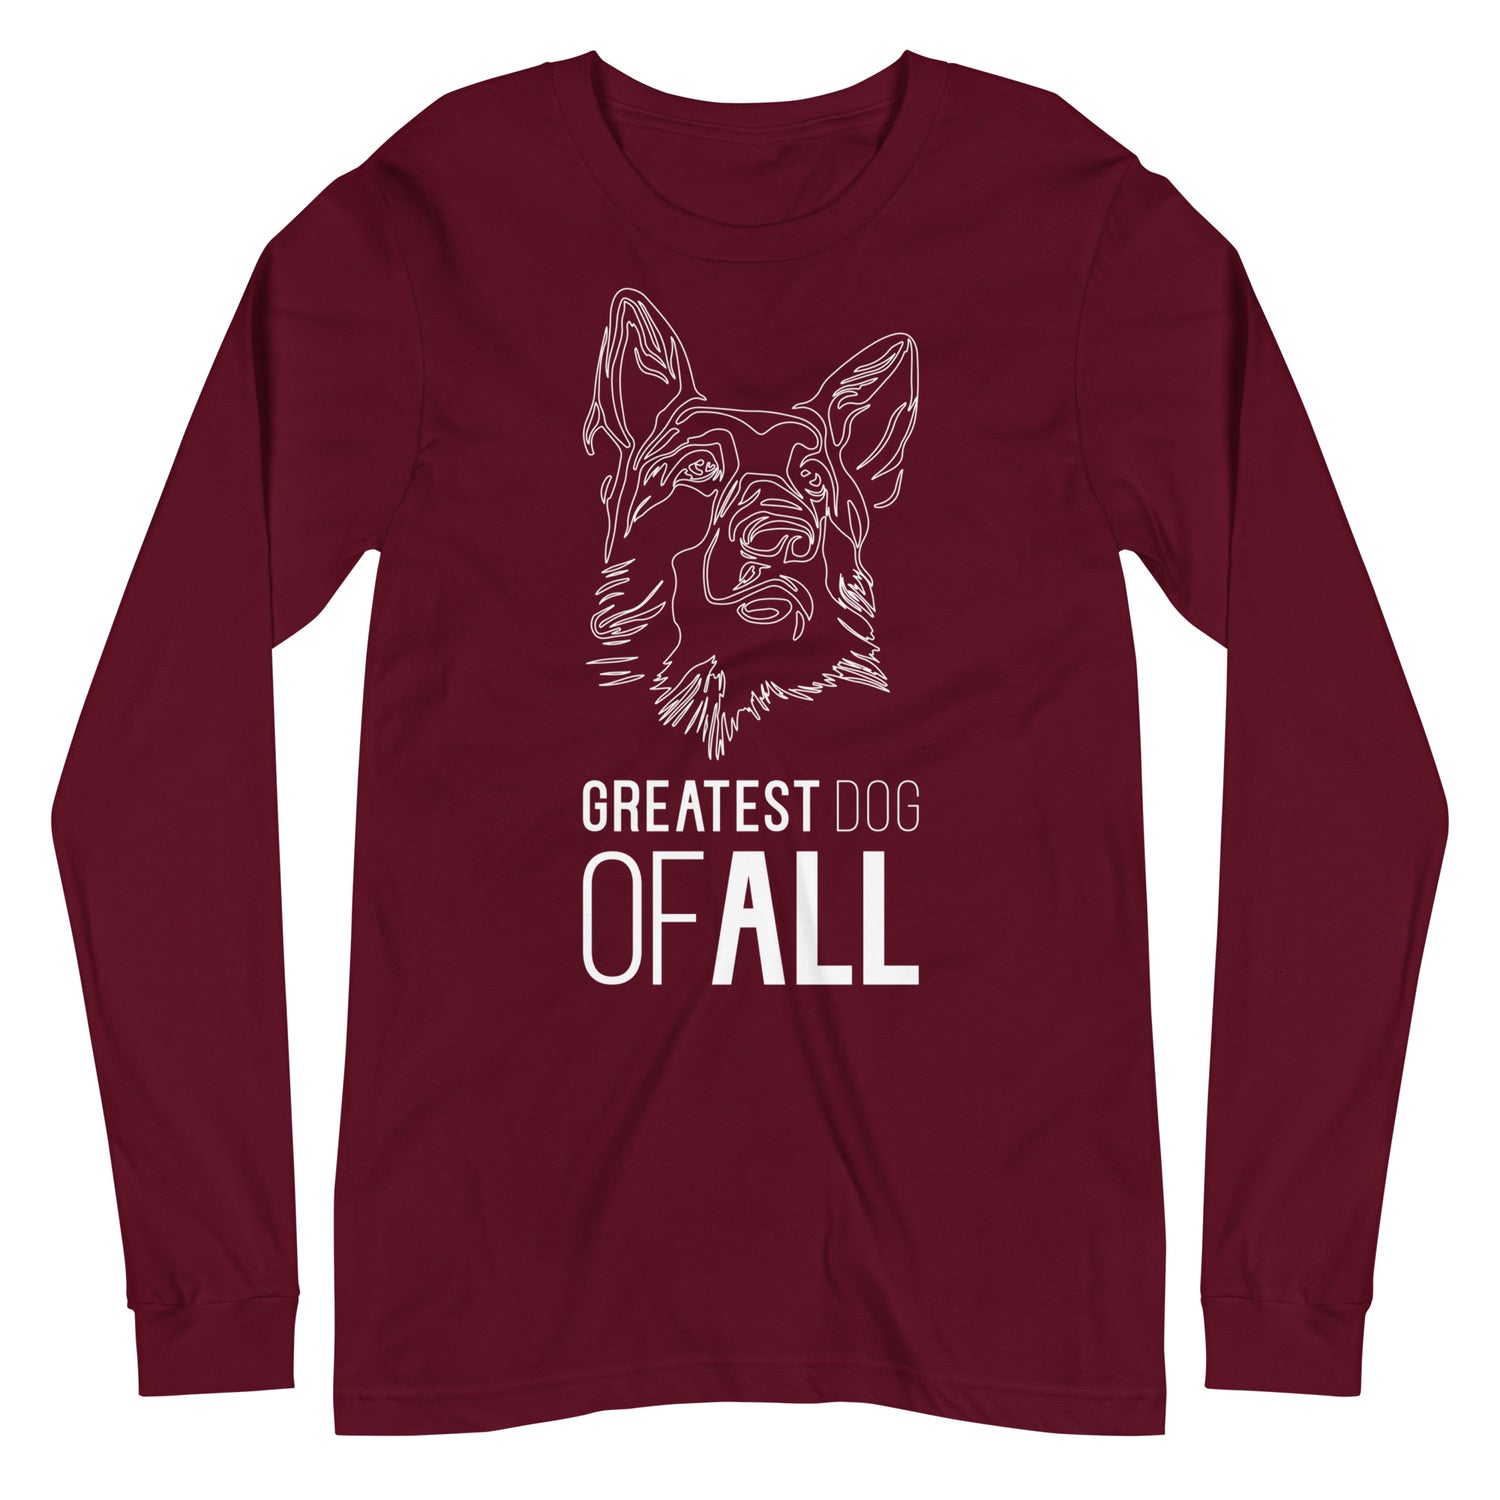 White line German Shepherd face with Greatest Dog of All caption on unisex maroon long sleeve t-shirt